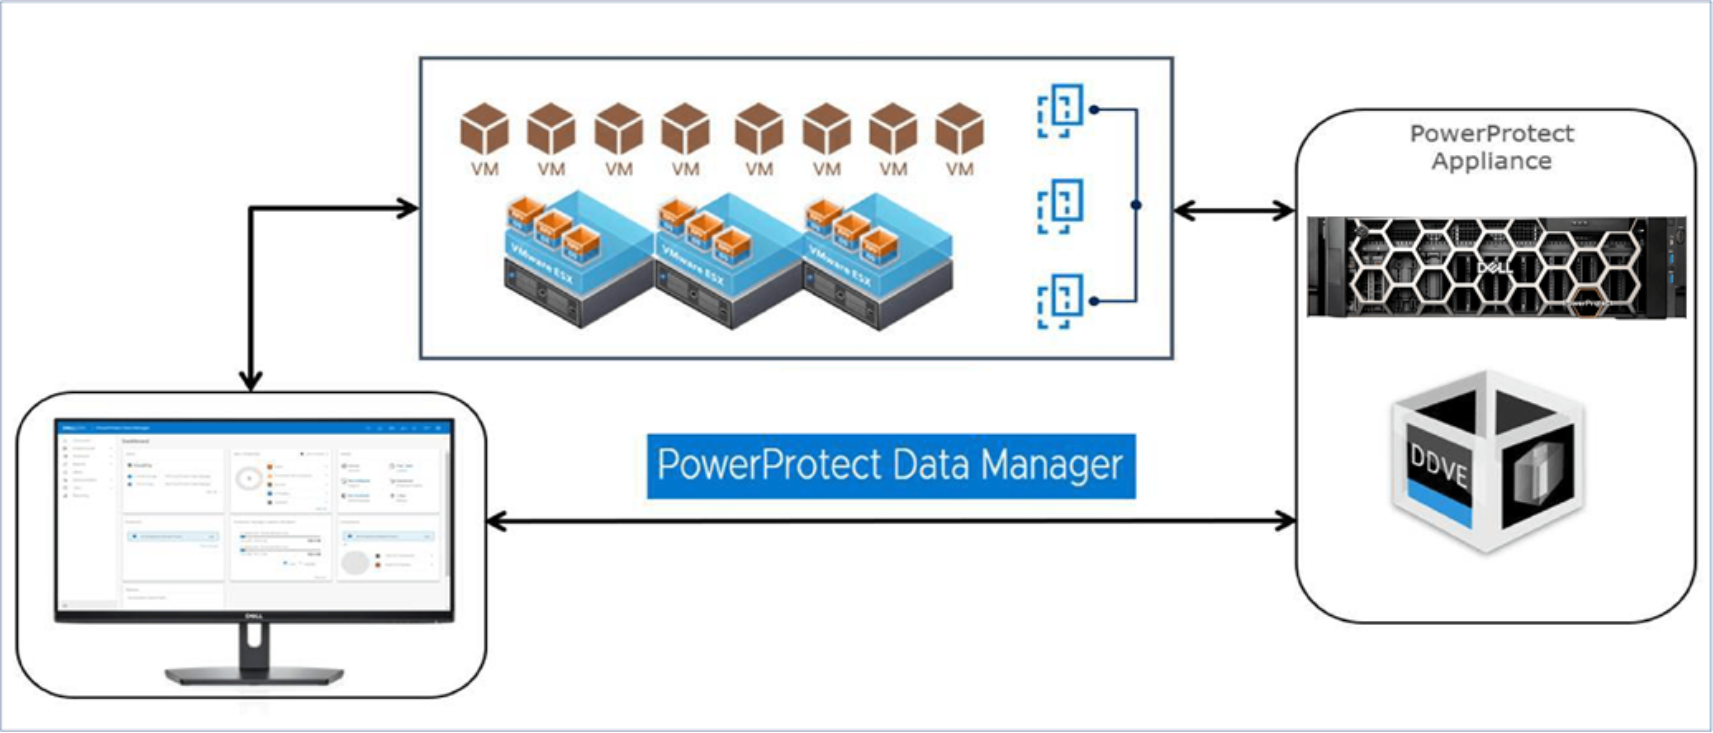 A high-level diagram of PowerProtect Data Manager